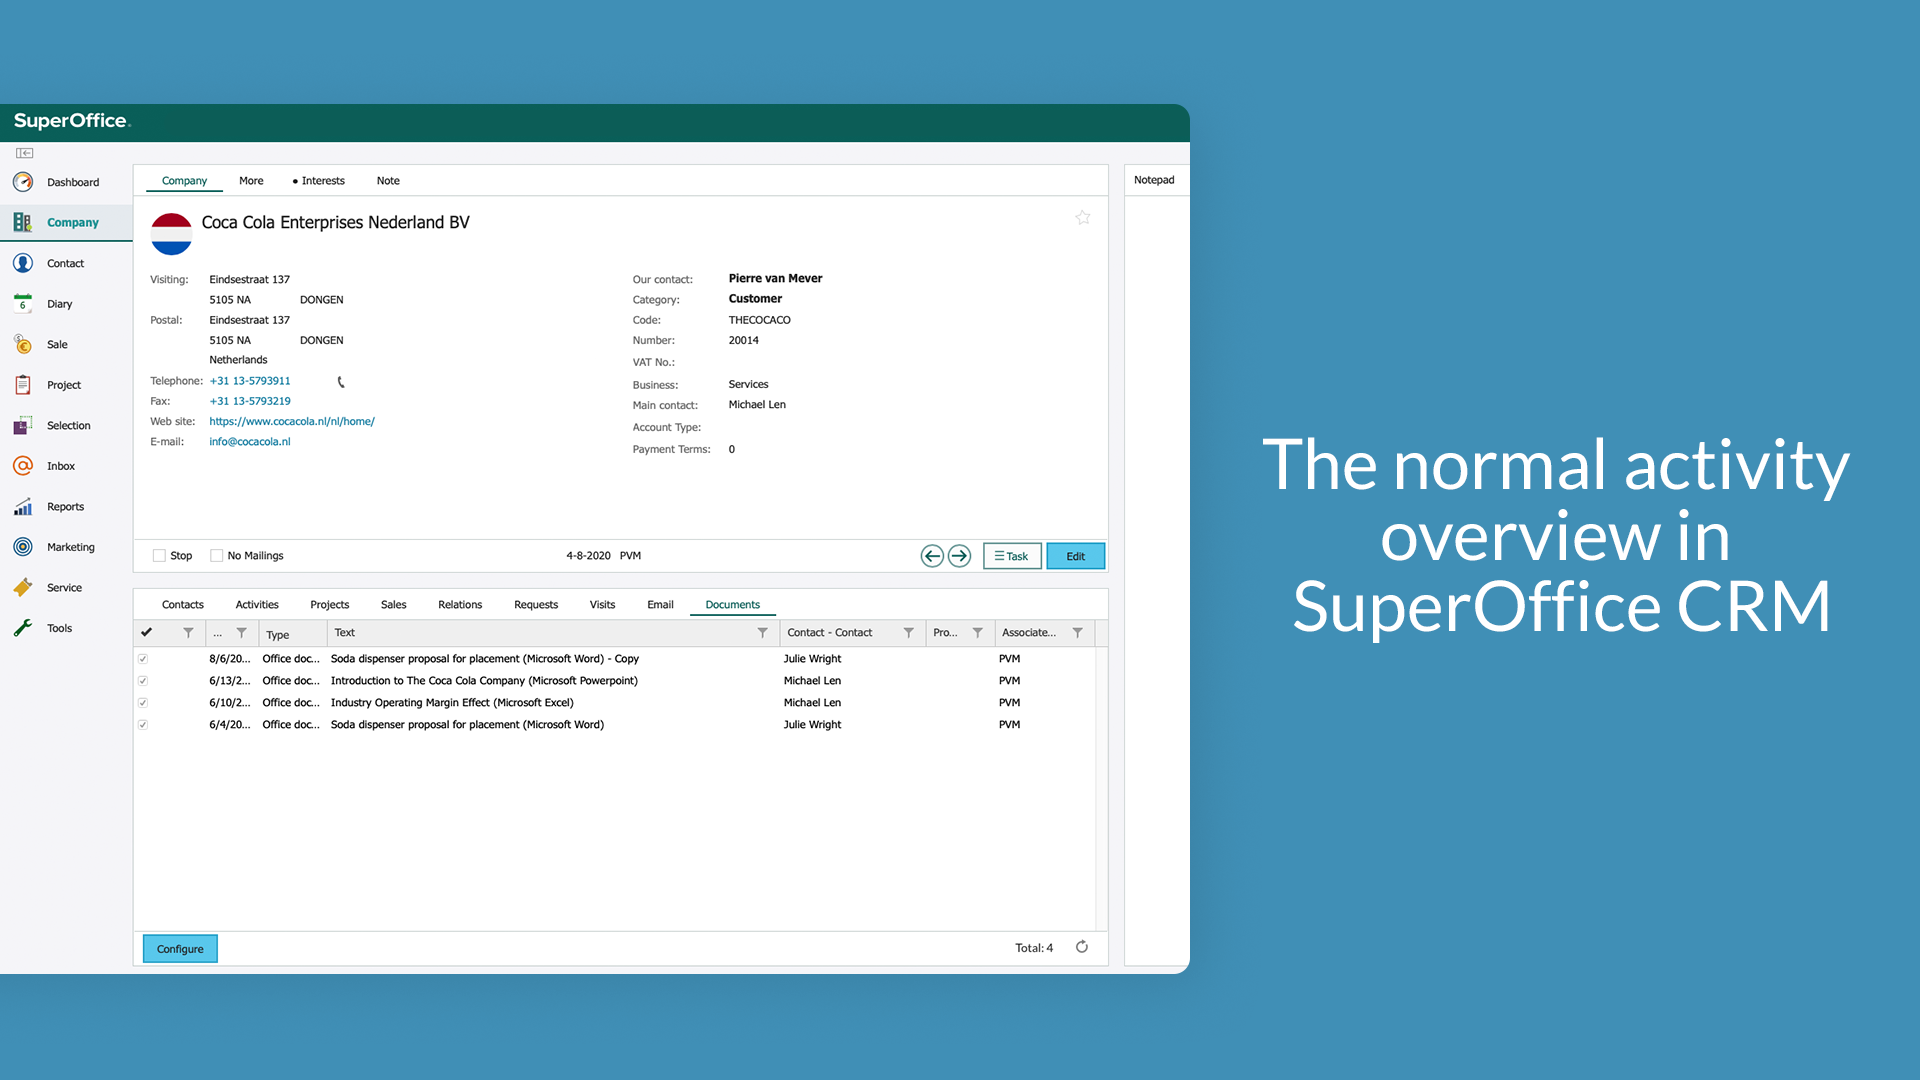 1. The normal activity overview in SuperOffice CRM.png